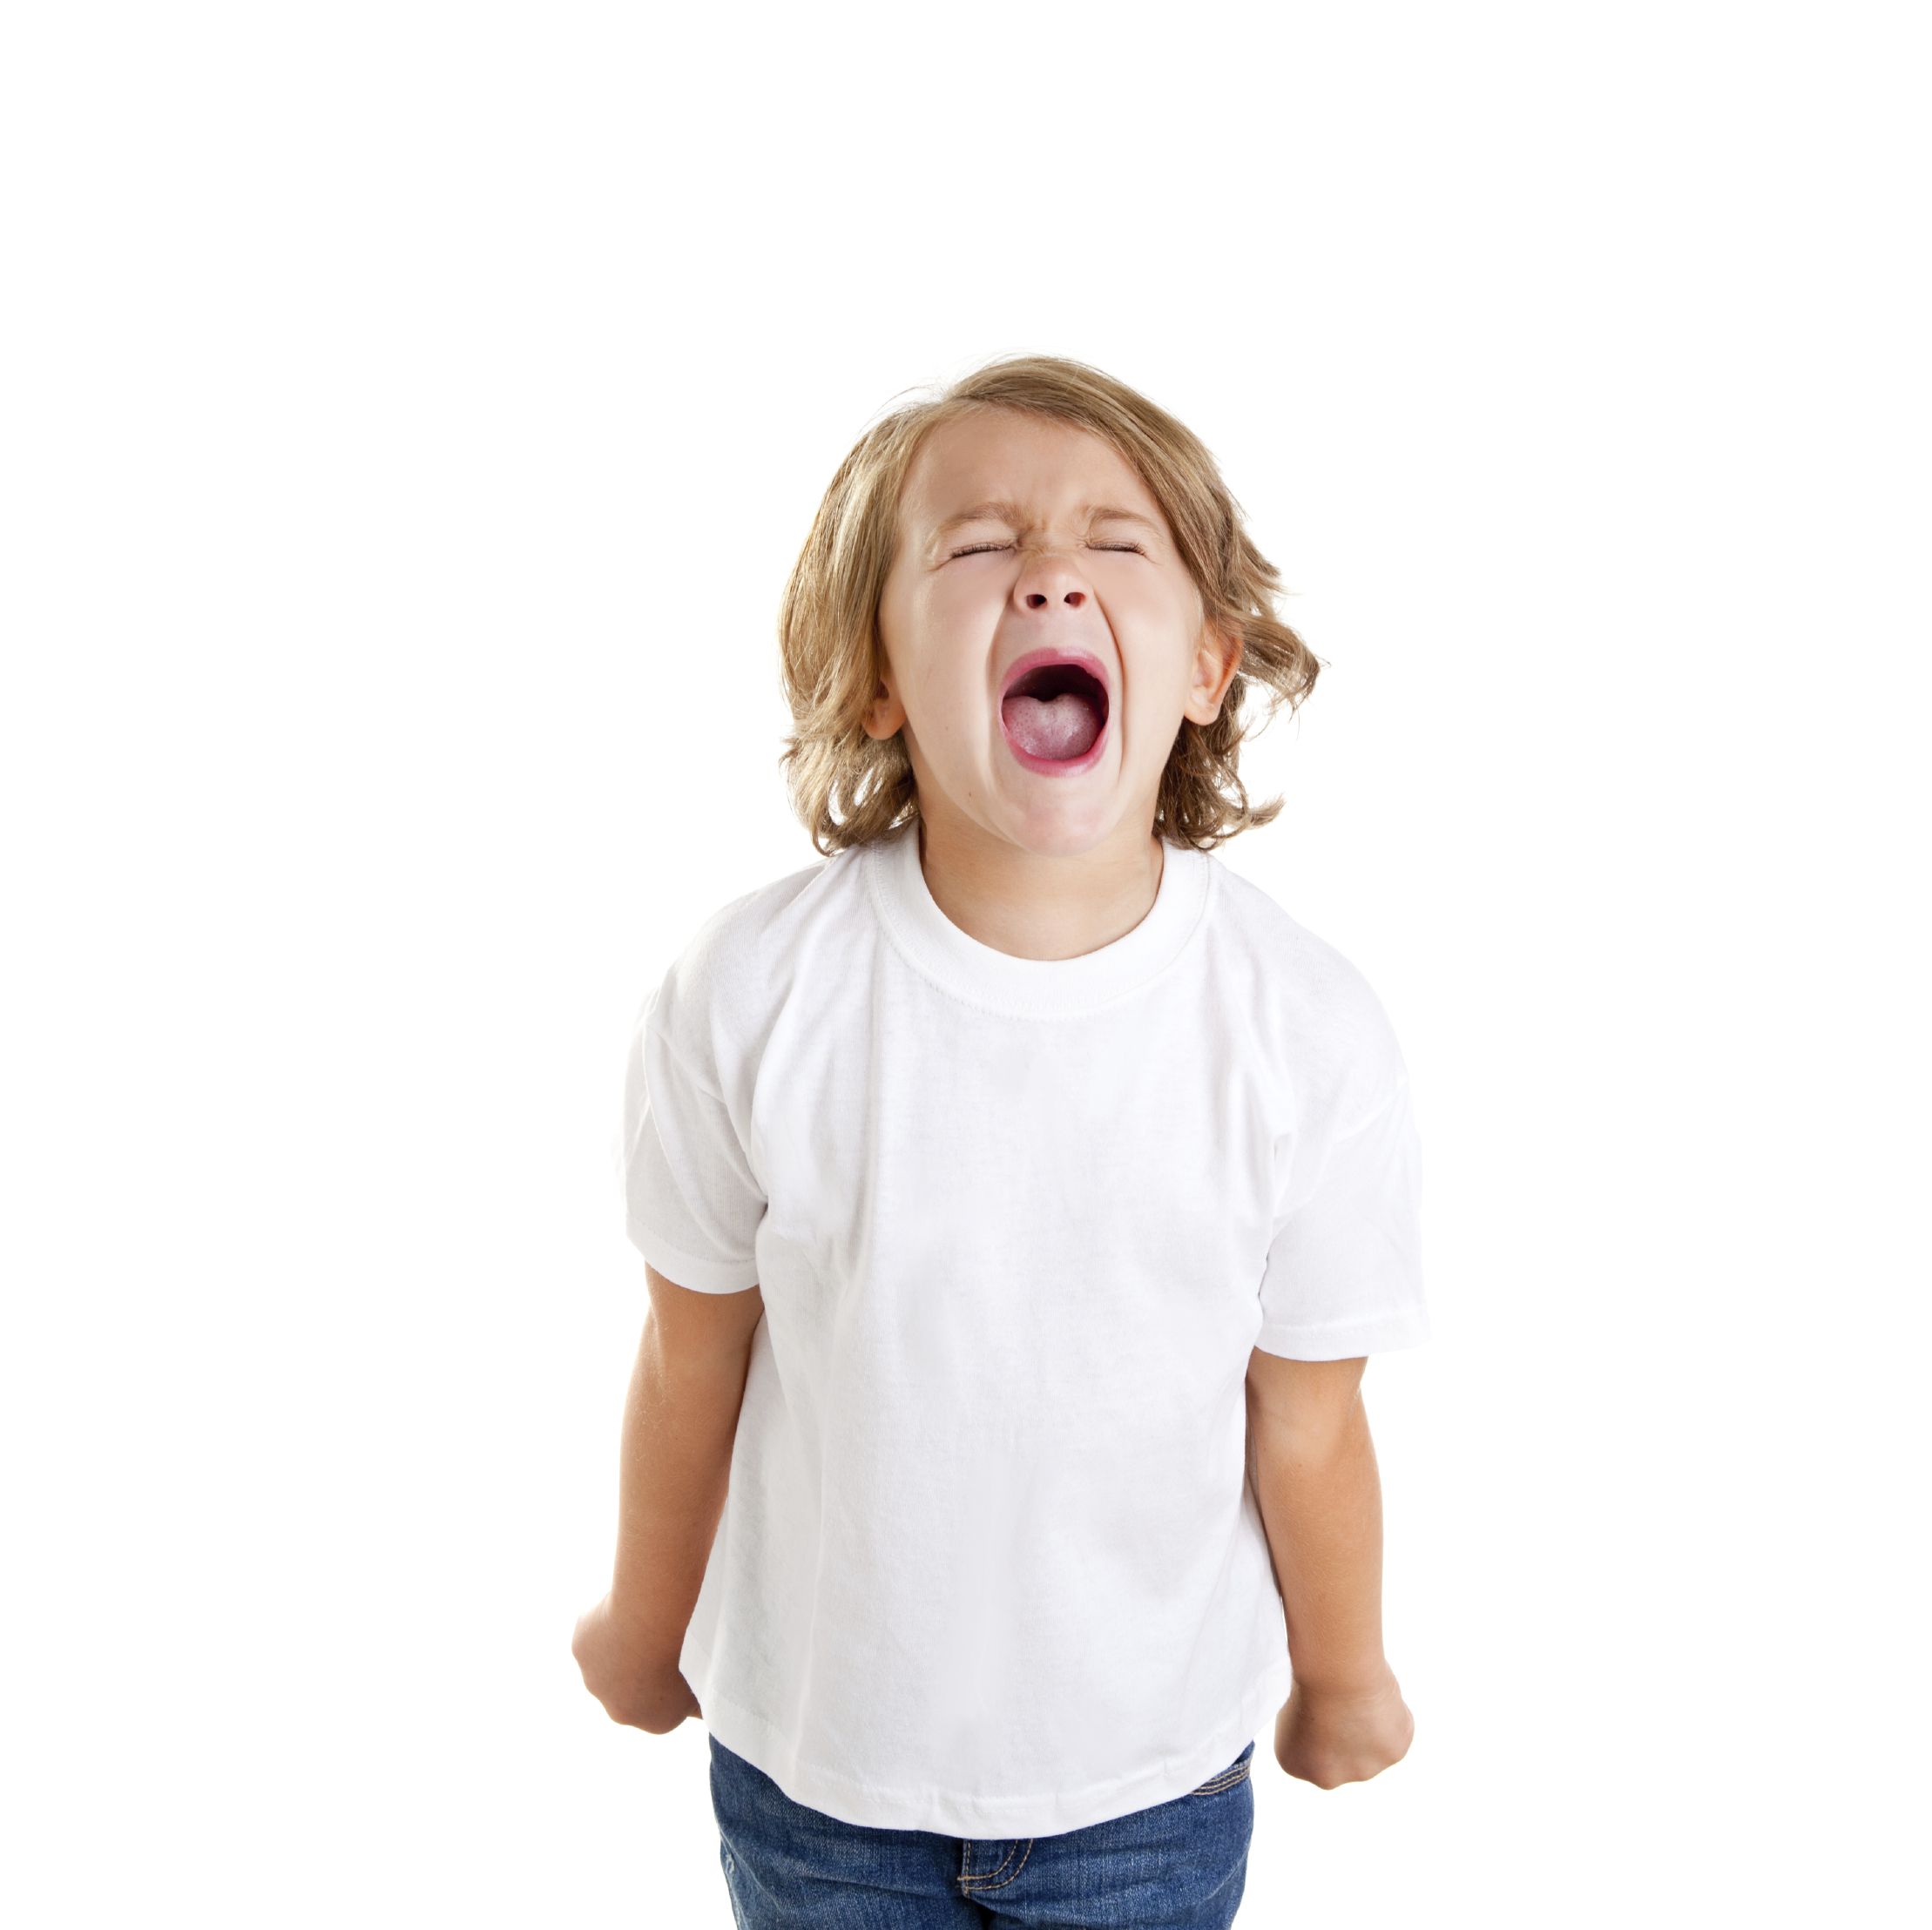 How To Improve The Way Your Child Manages Anger | Improve Your Child